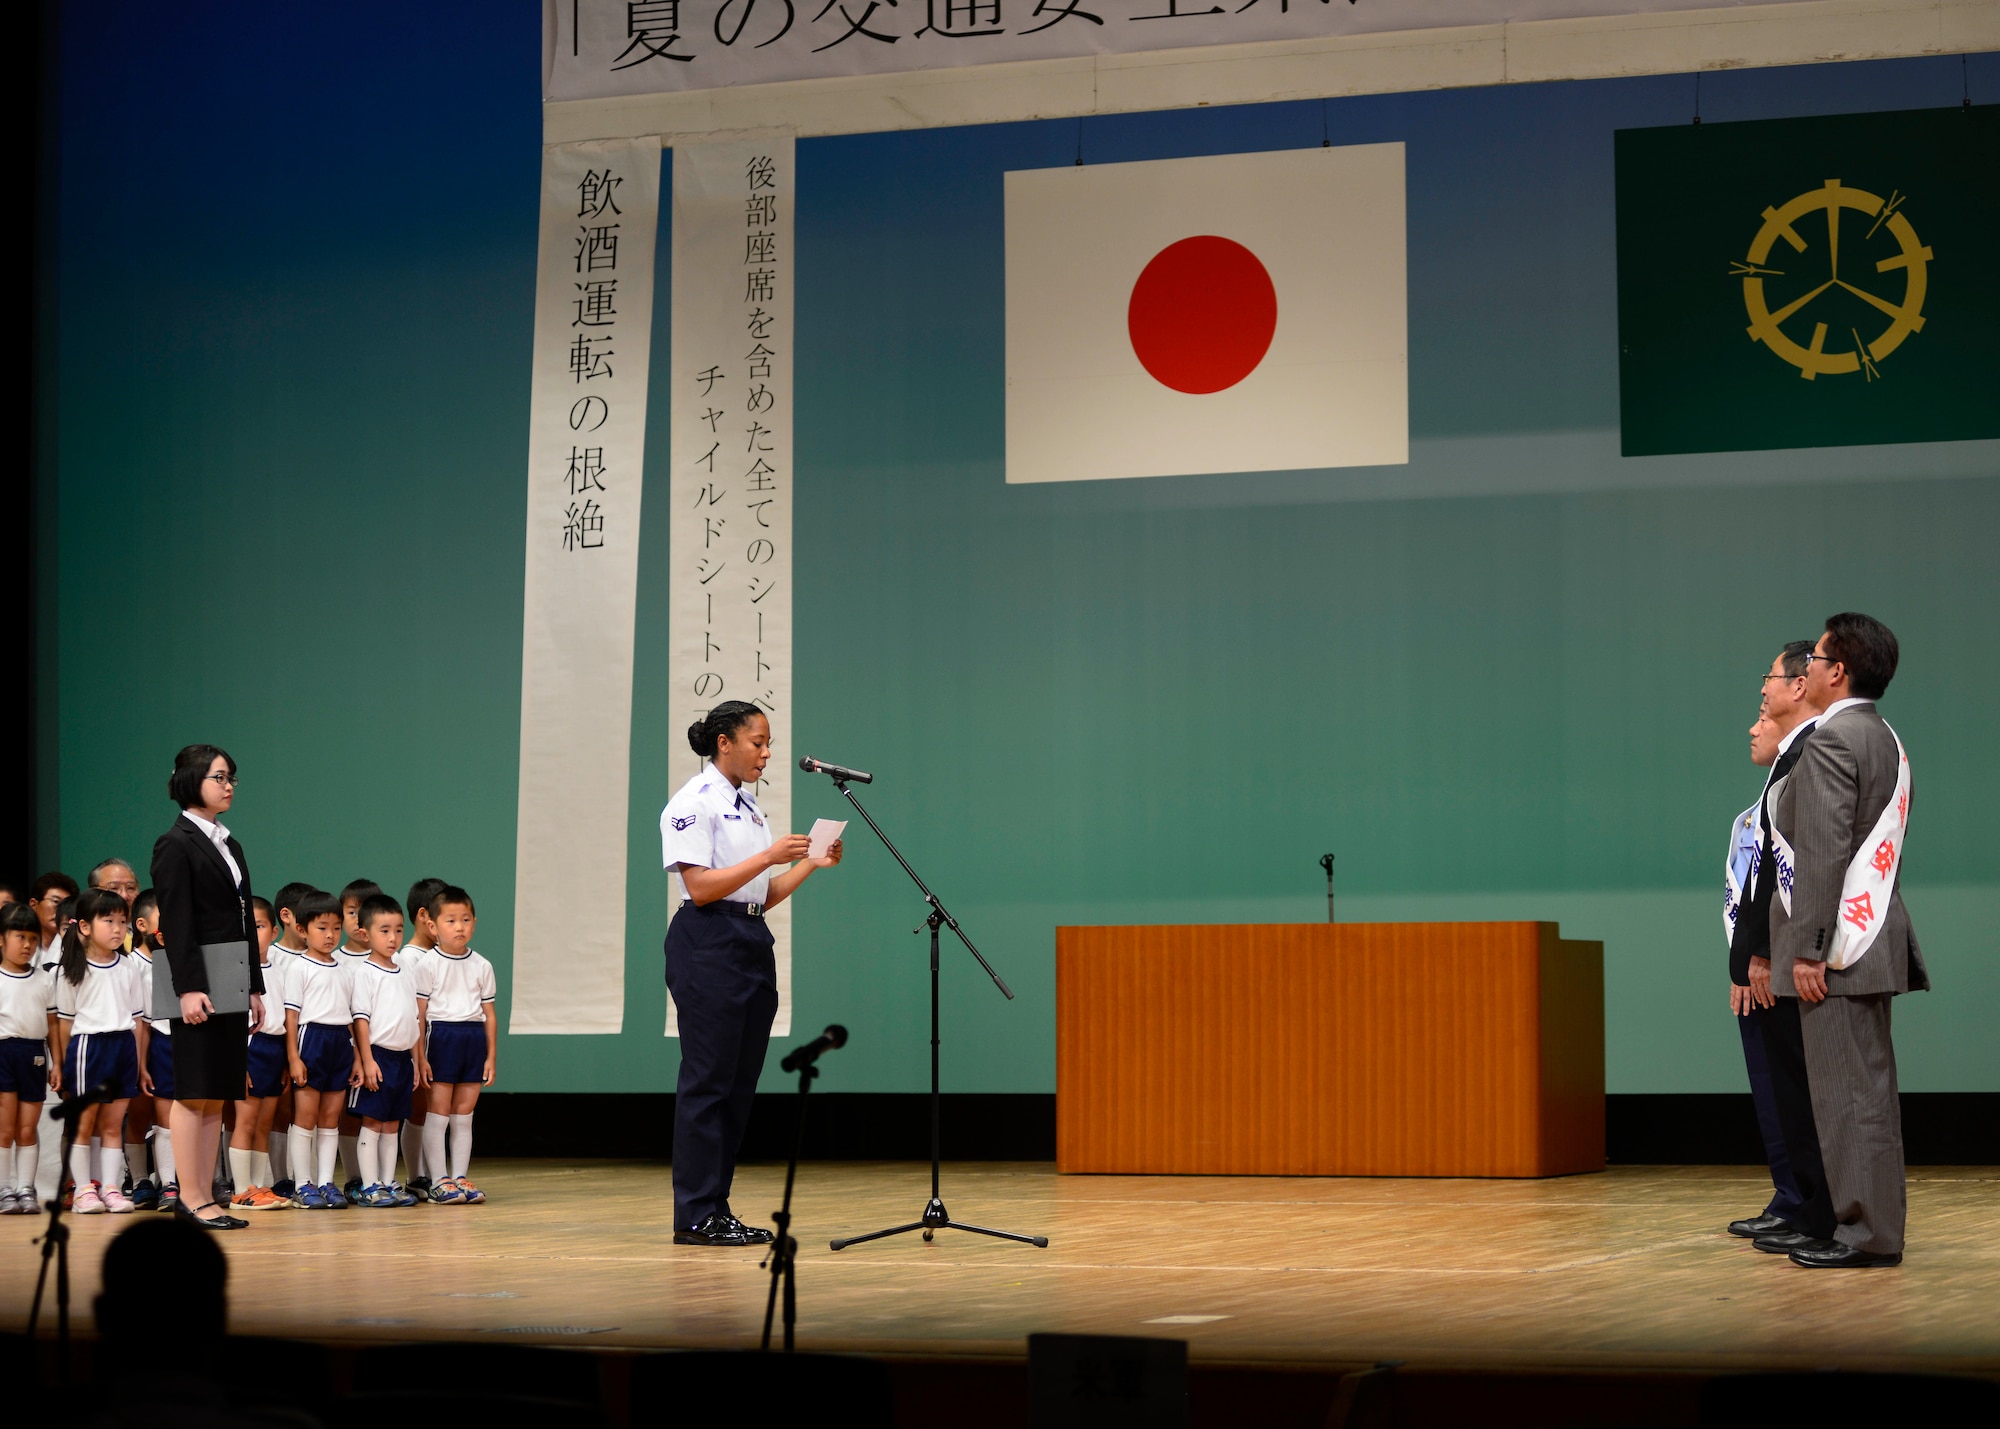 U.S. Air Force Airman 1st Class Sadie Colbert, speaks on behalf of Misawa Air Base at the Prefectural Summer Traffic Safety Campaign 2017, at Misawa City, Japan, July 21, 2017. Several city officials spoke on Misawa’s traffic incidents for the past year, with a total of 140 injuries, two major accidents and two fatalities. (U.S. Navy Photo by Mass Communication Specialist 3rd Class Samuel Bacon)